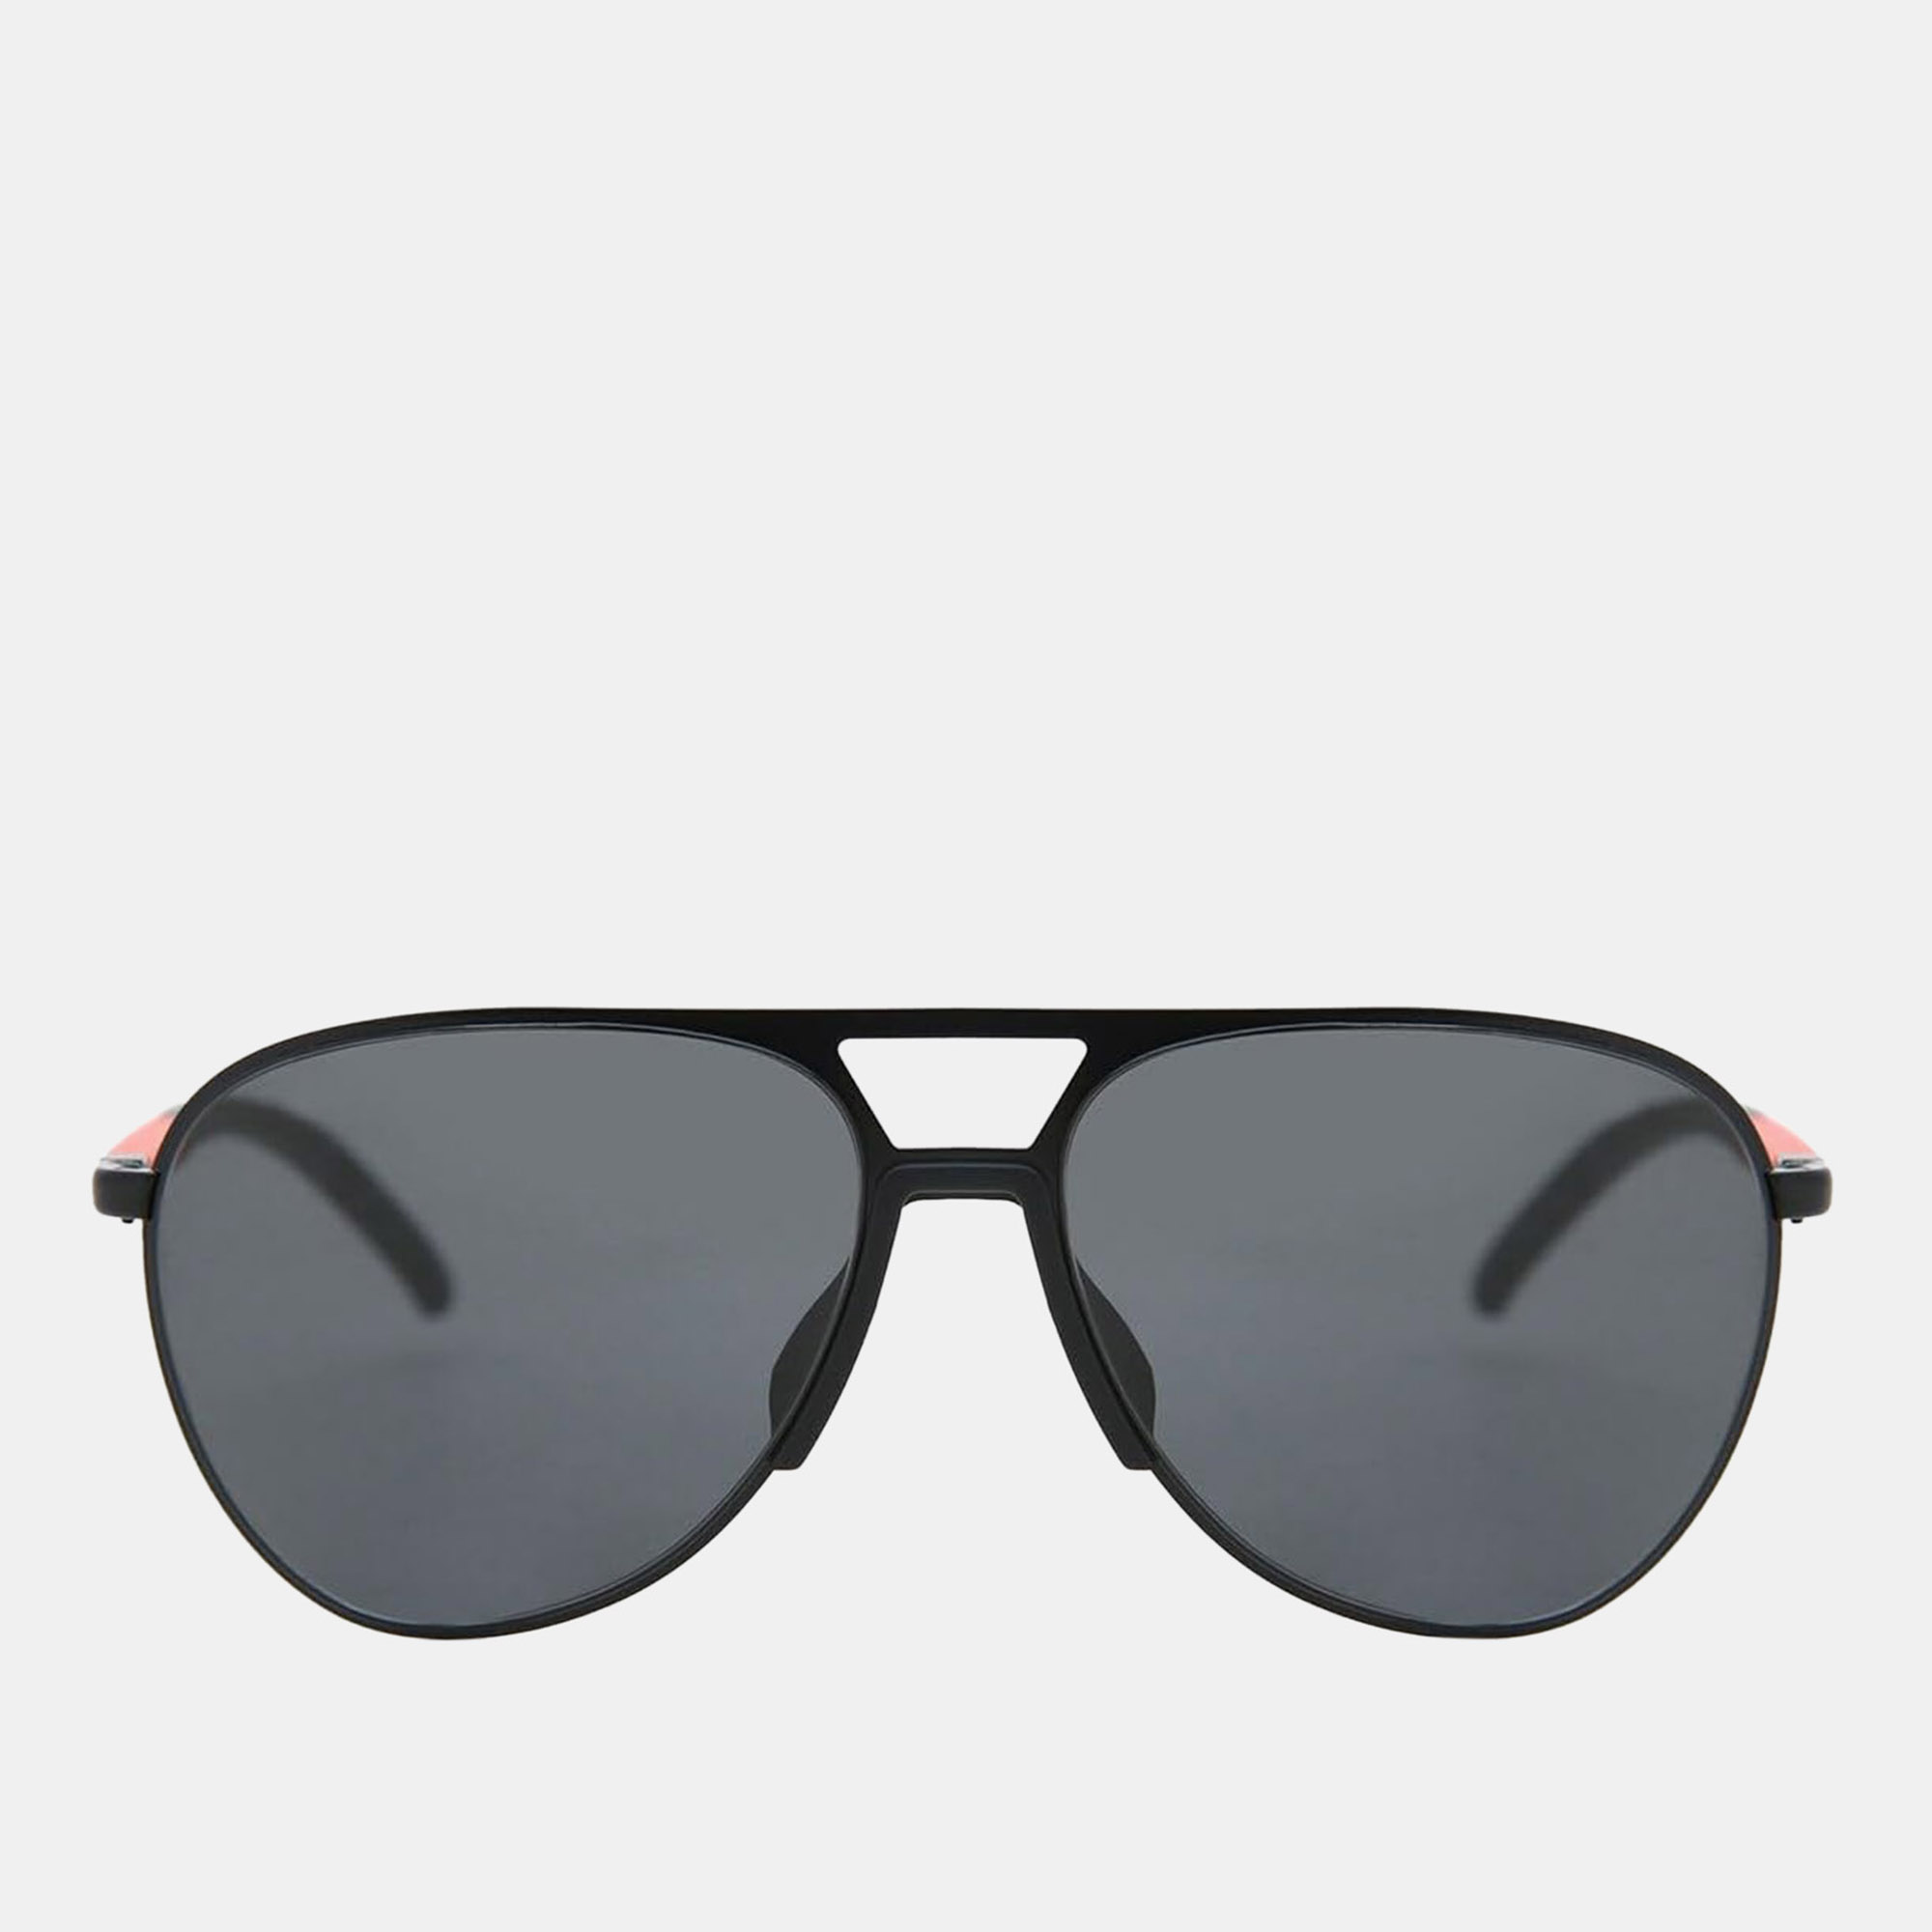 Elevate your eyewear game with these Prada sunglasses. Meticulously crafted from premium materials they offer unparalleled protection and a timeless design making them a must have accessory for the fashion forward.